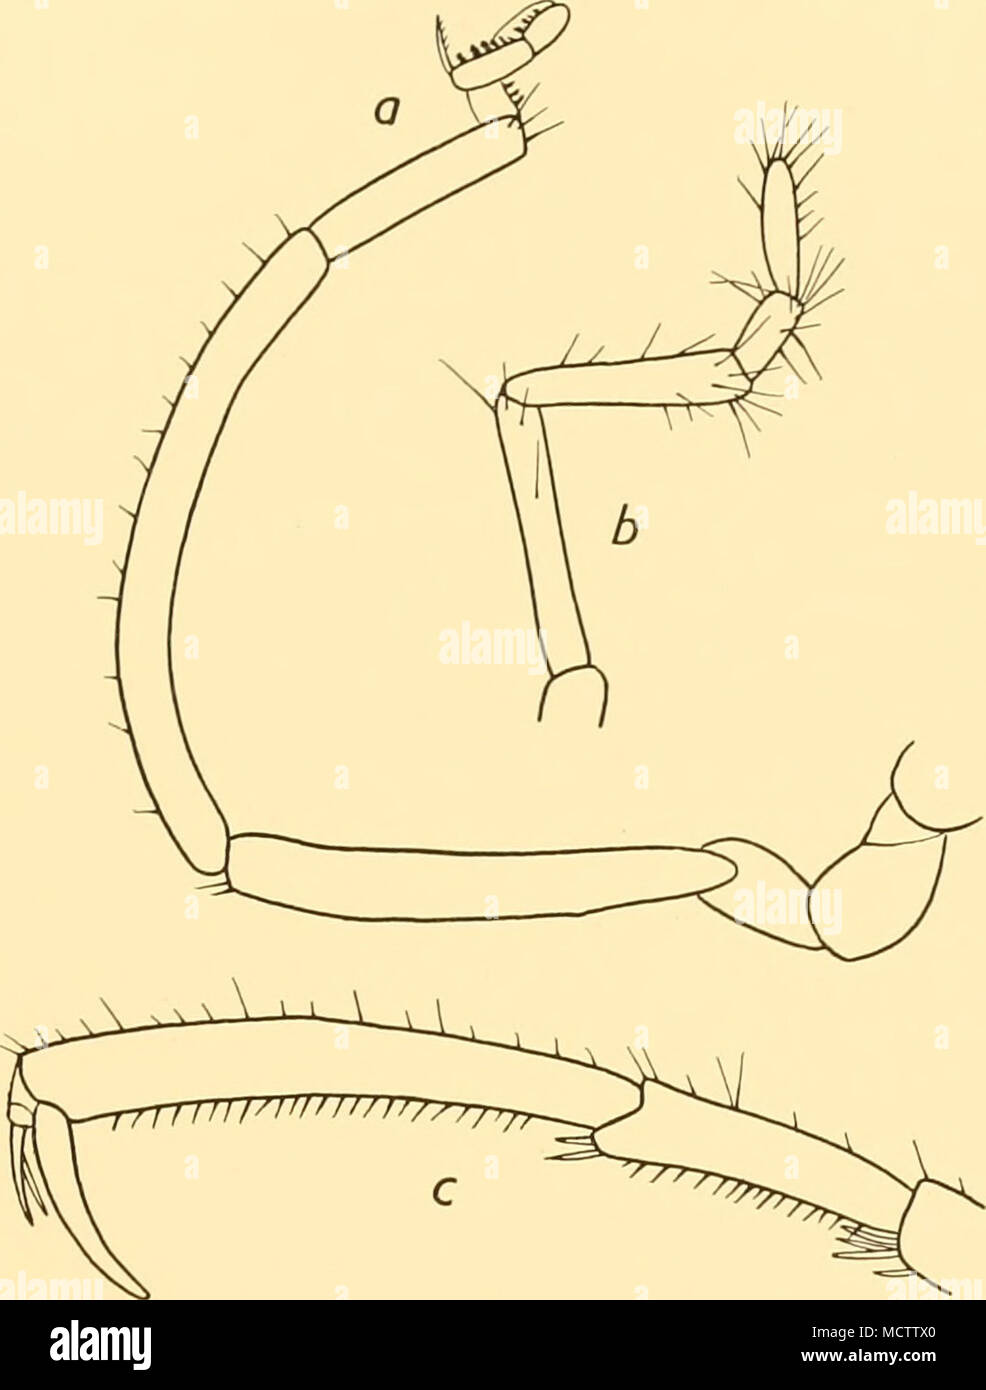 . Fig. 20. Nymphon paucidens, n.sp.: a. Oviger of holotype: X 47. b. Palp of holotype: &lt; 60. c. Terminal segments of third leg of female: x 47. Nymphon charcoti, Bouvier (Fig. 10 b). N. charcoti, Bouvier, 1911, p. 1138; 1913, p. 81, text-figs. 32-34. N. charcoti, Caiman, 1915, p. 29. A'', charcoti, Loman, 1923, p. 15. St. 39. 25. iii. 26. East Cumberland Bay, South Georgia, from 8 cables S 81° W of Merton Rock to 1-3 miles N 7° E of Macmahon Rock, 179-235 m.; gy. M. Large otter trawl: 17 specimens, including ovigerous and larvigerous $$, several with encrusting Polyzoa. St. 42. I. iv. 26. O Stock Photo